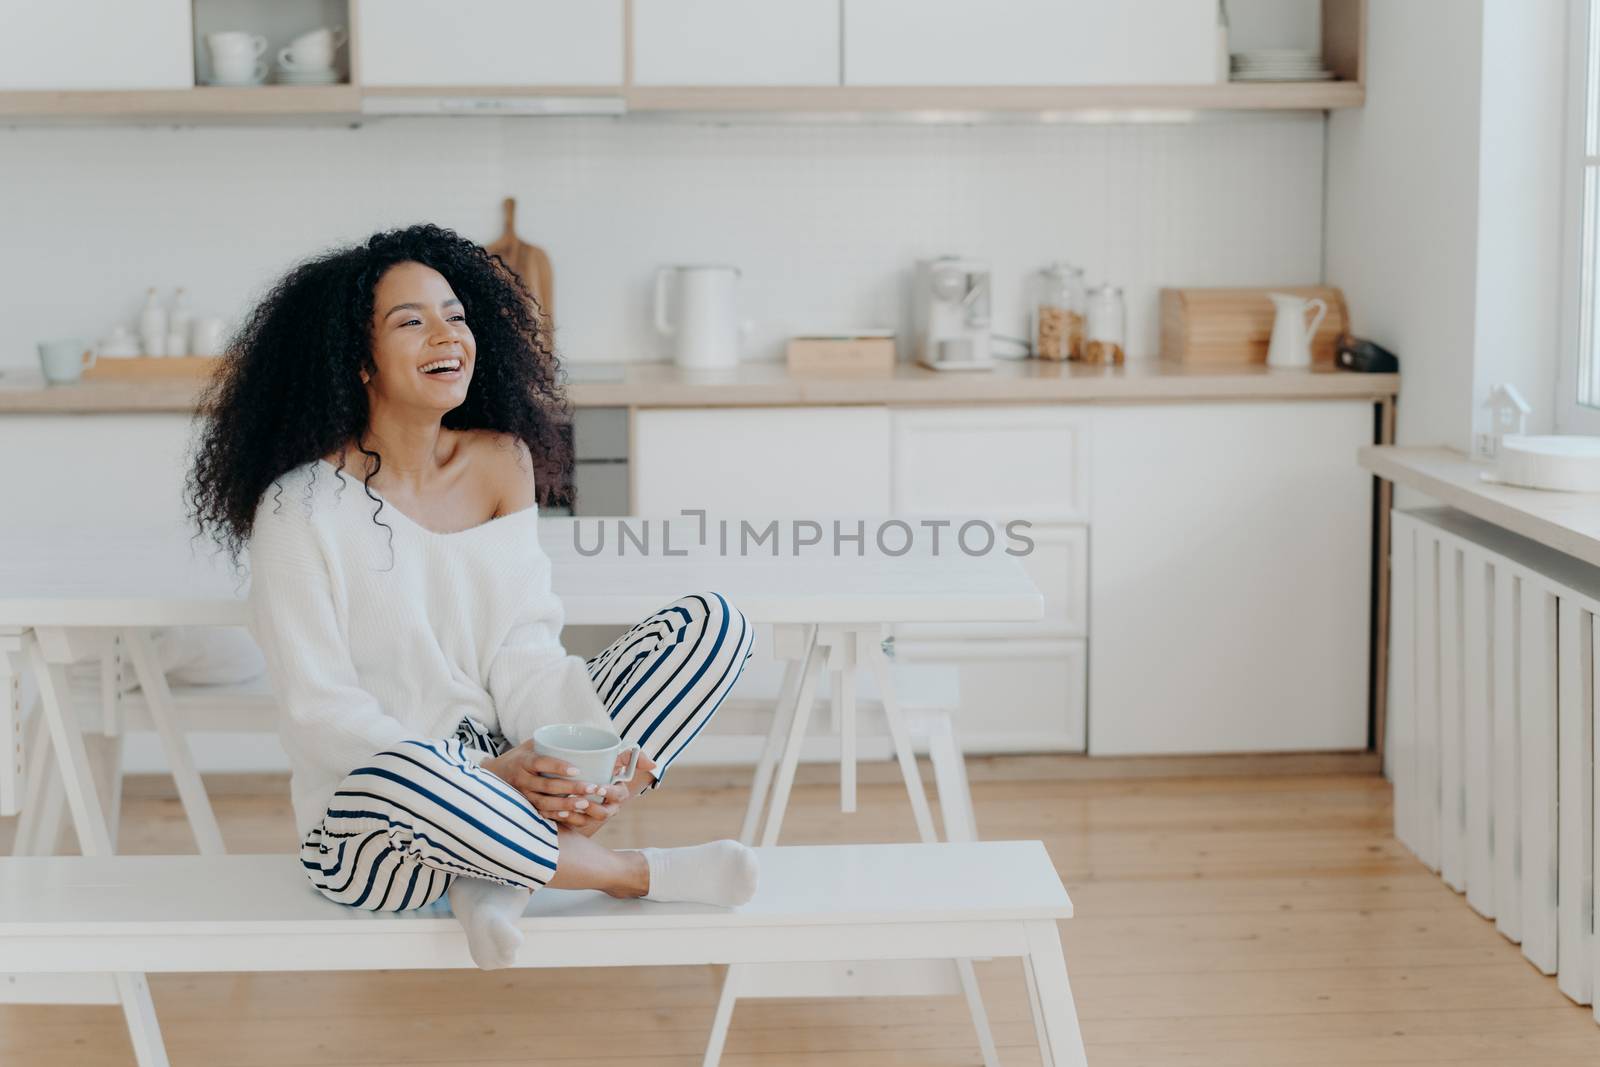 Horizontal shot of overjoyed dark skinned woman laughs pleasantly, drinks coffee, looks out of window in kitchen, dressed in fashionable clothes. Smiling lady with hot tasty beverage, relaxes at home